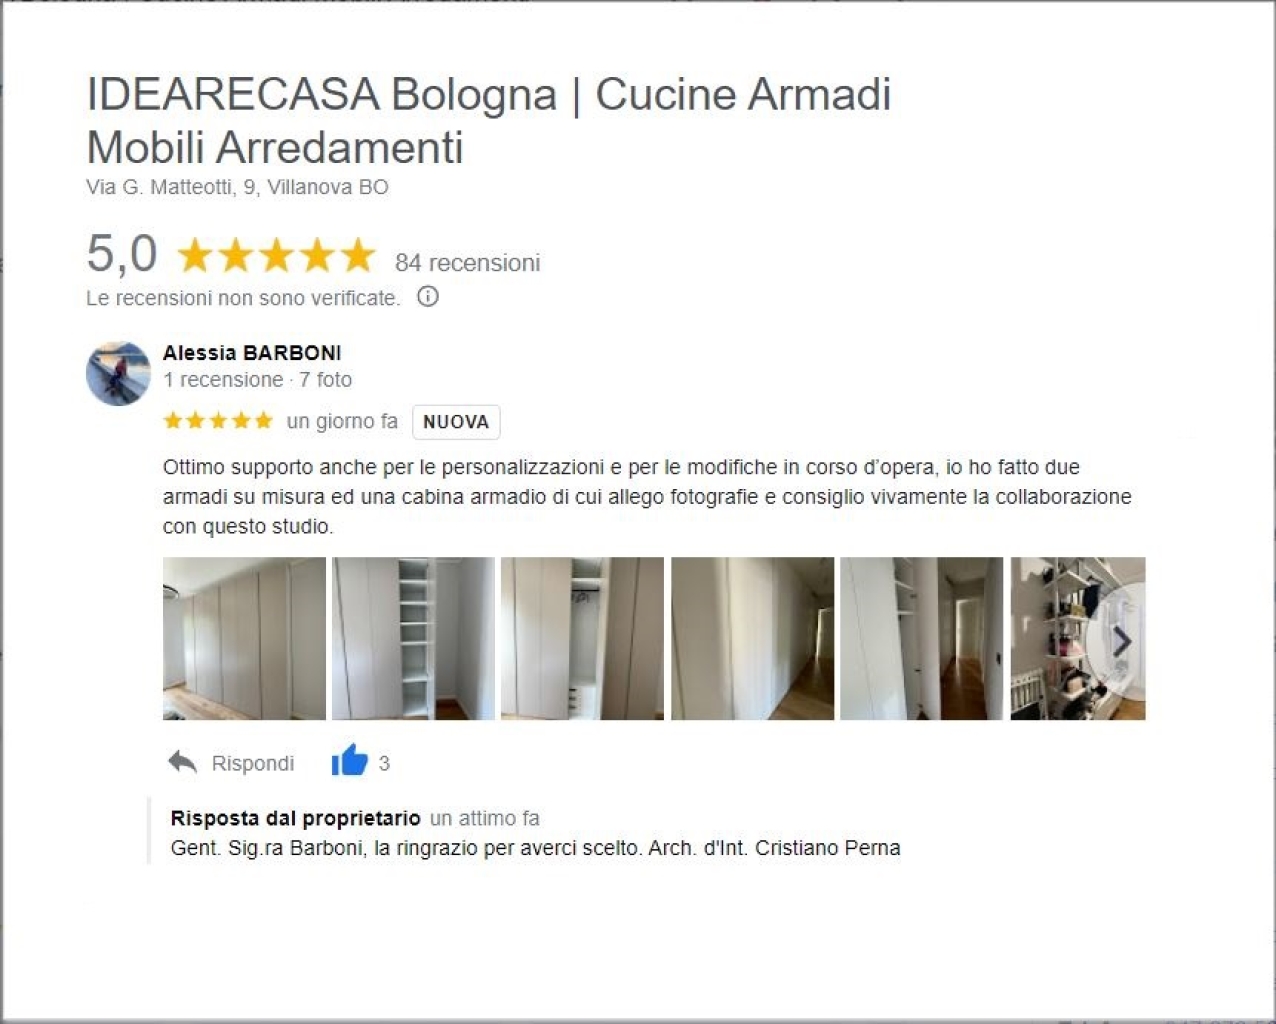 Review by Mrs. Barboni of Bologna